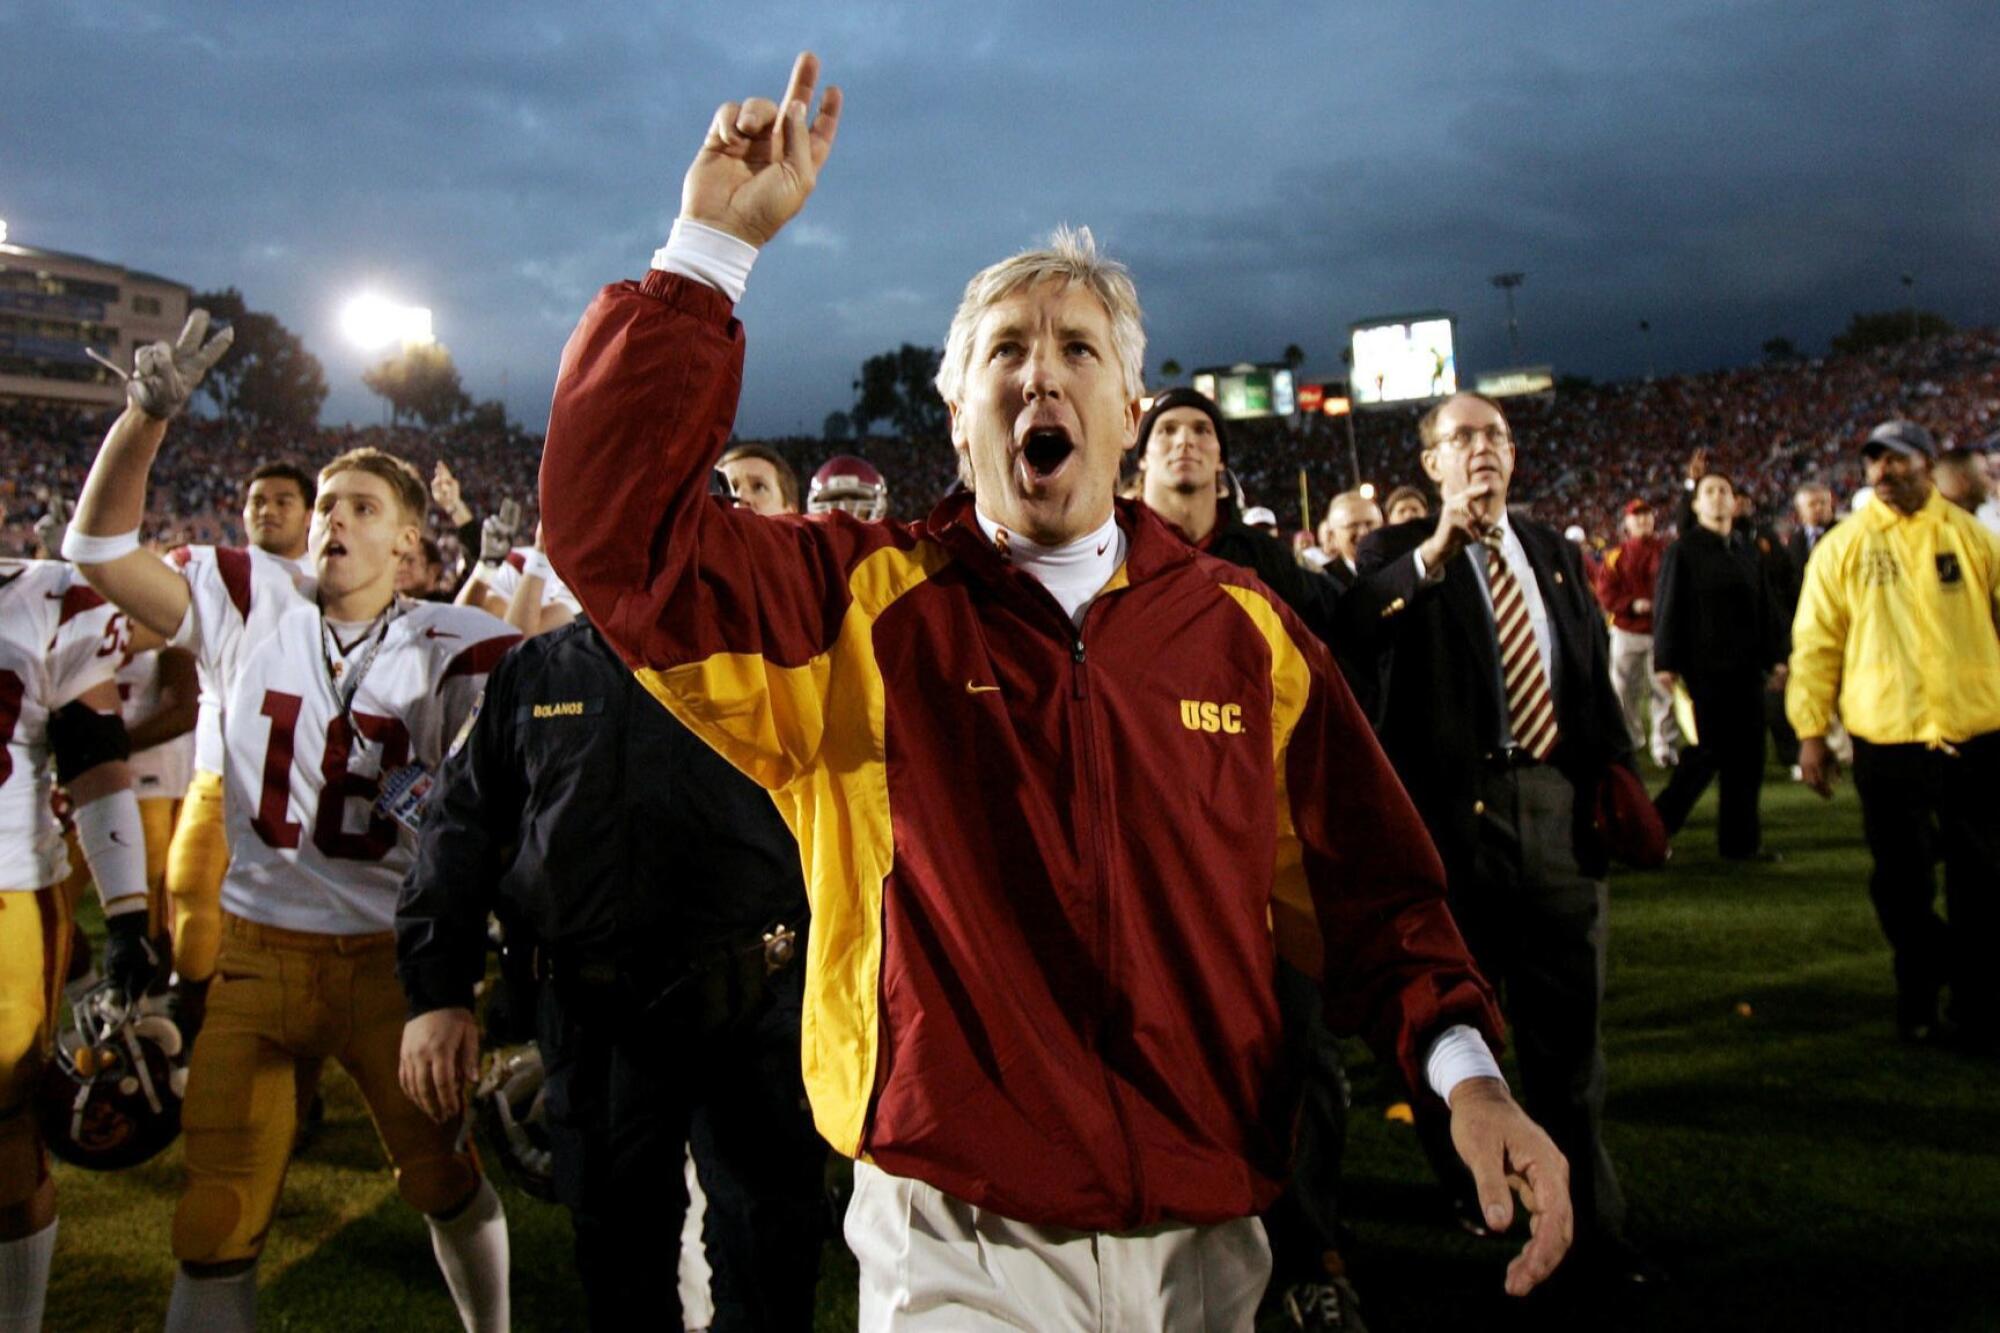 USC coach Pete Carroll celebrates with members of his team after defeating UCLA at the Rose Bowl in 2004.